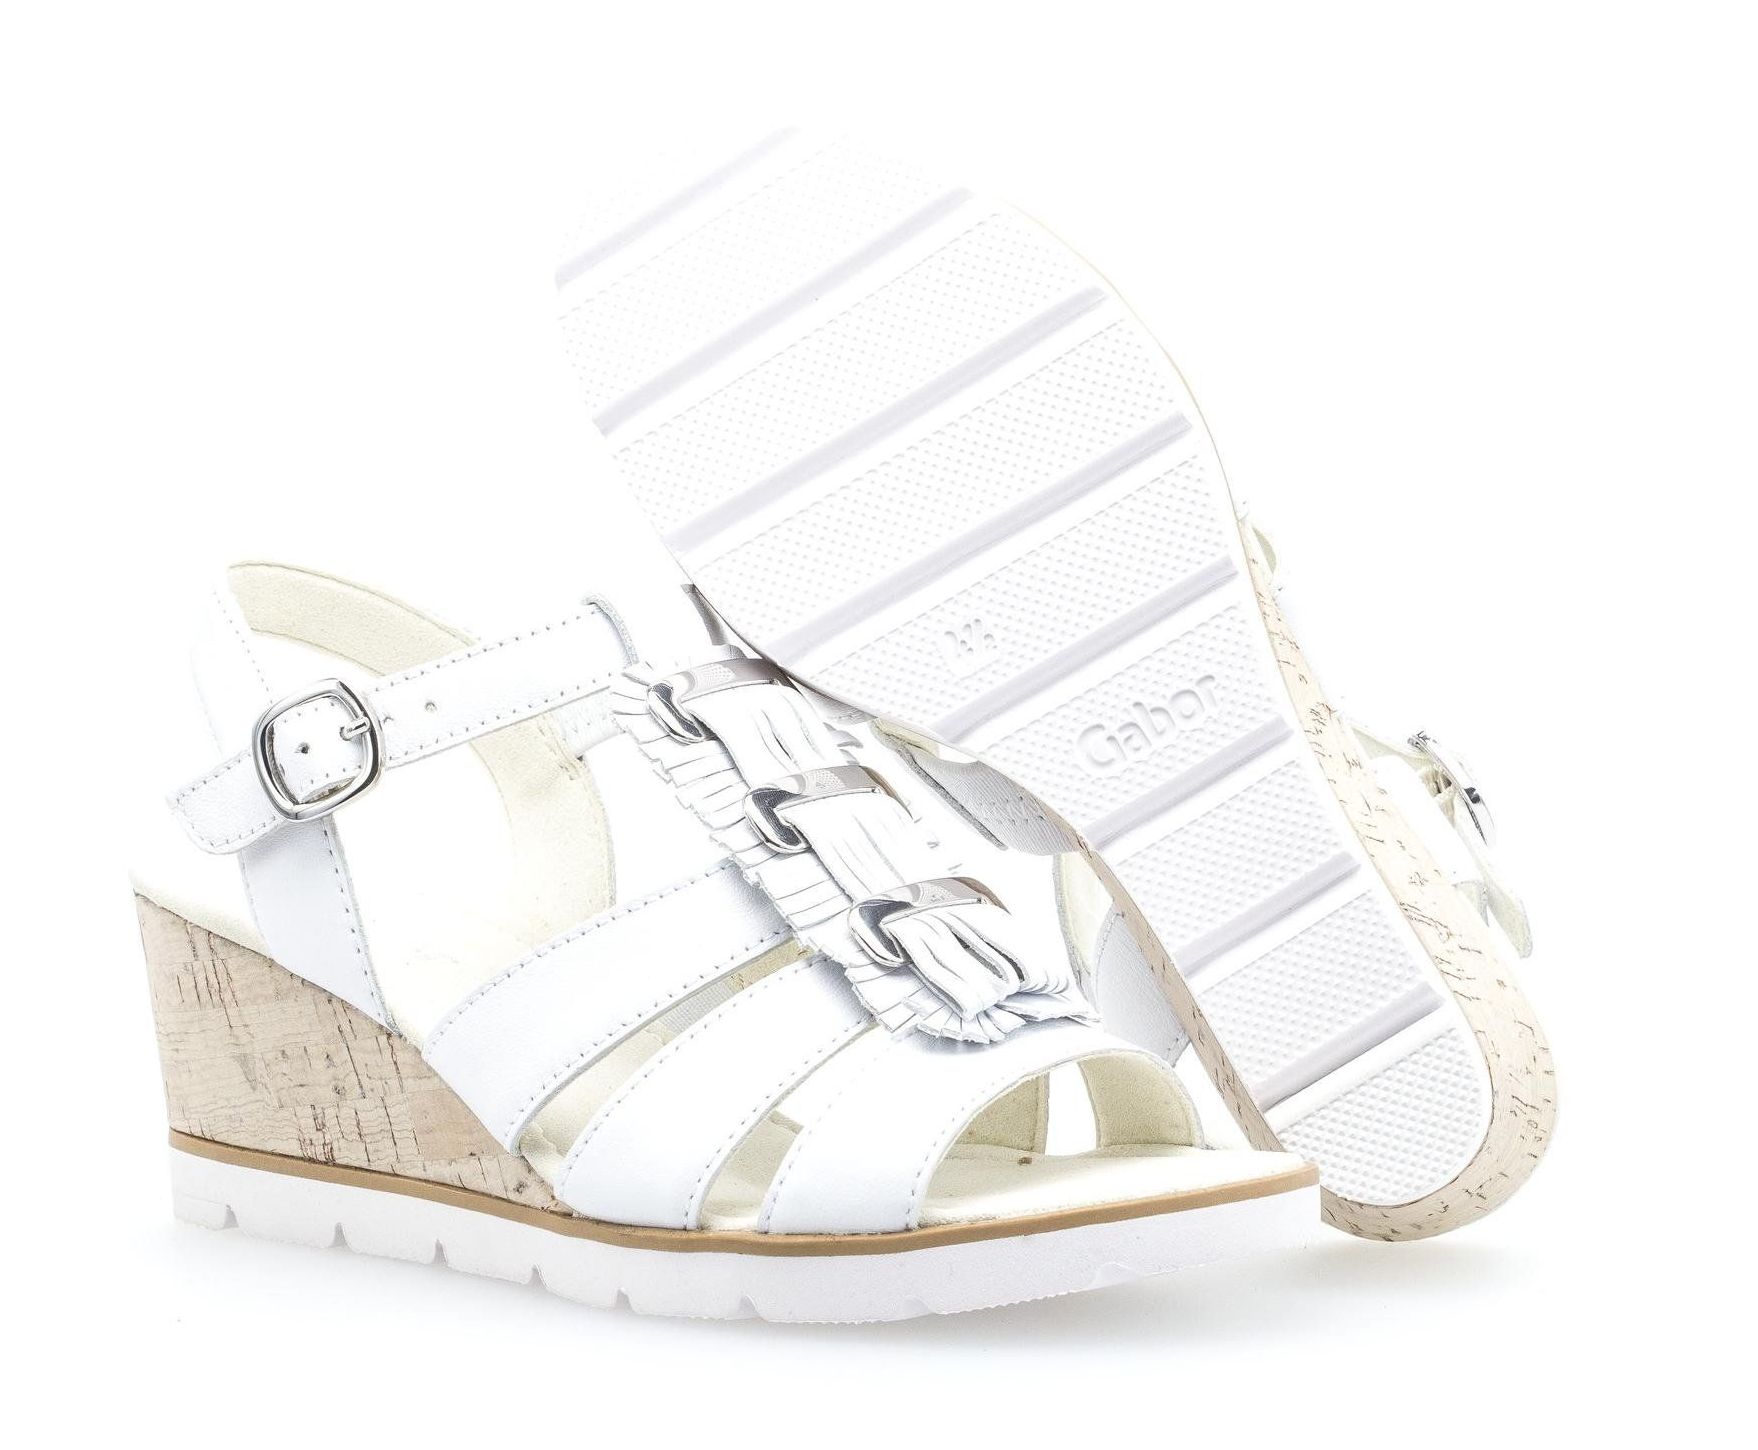 Sandal Gabor Wedge Sandals Smooth Leather White Gabor